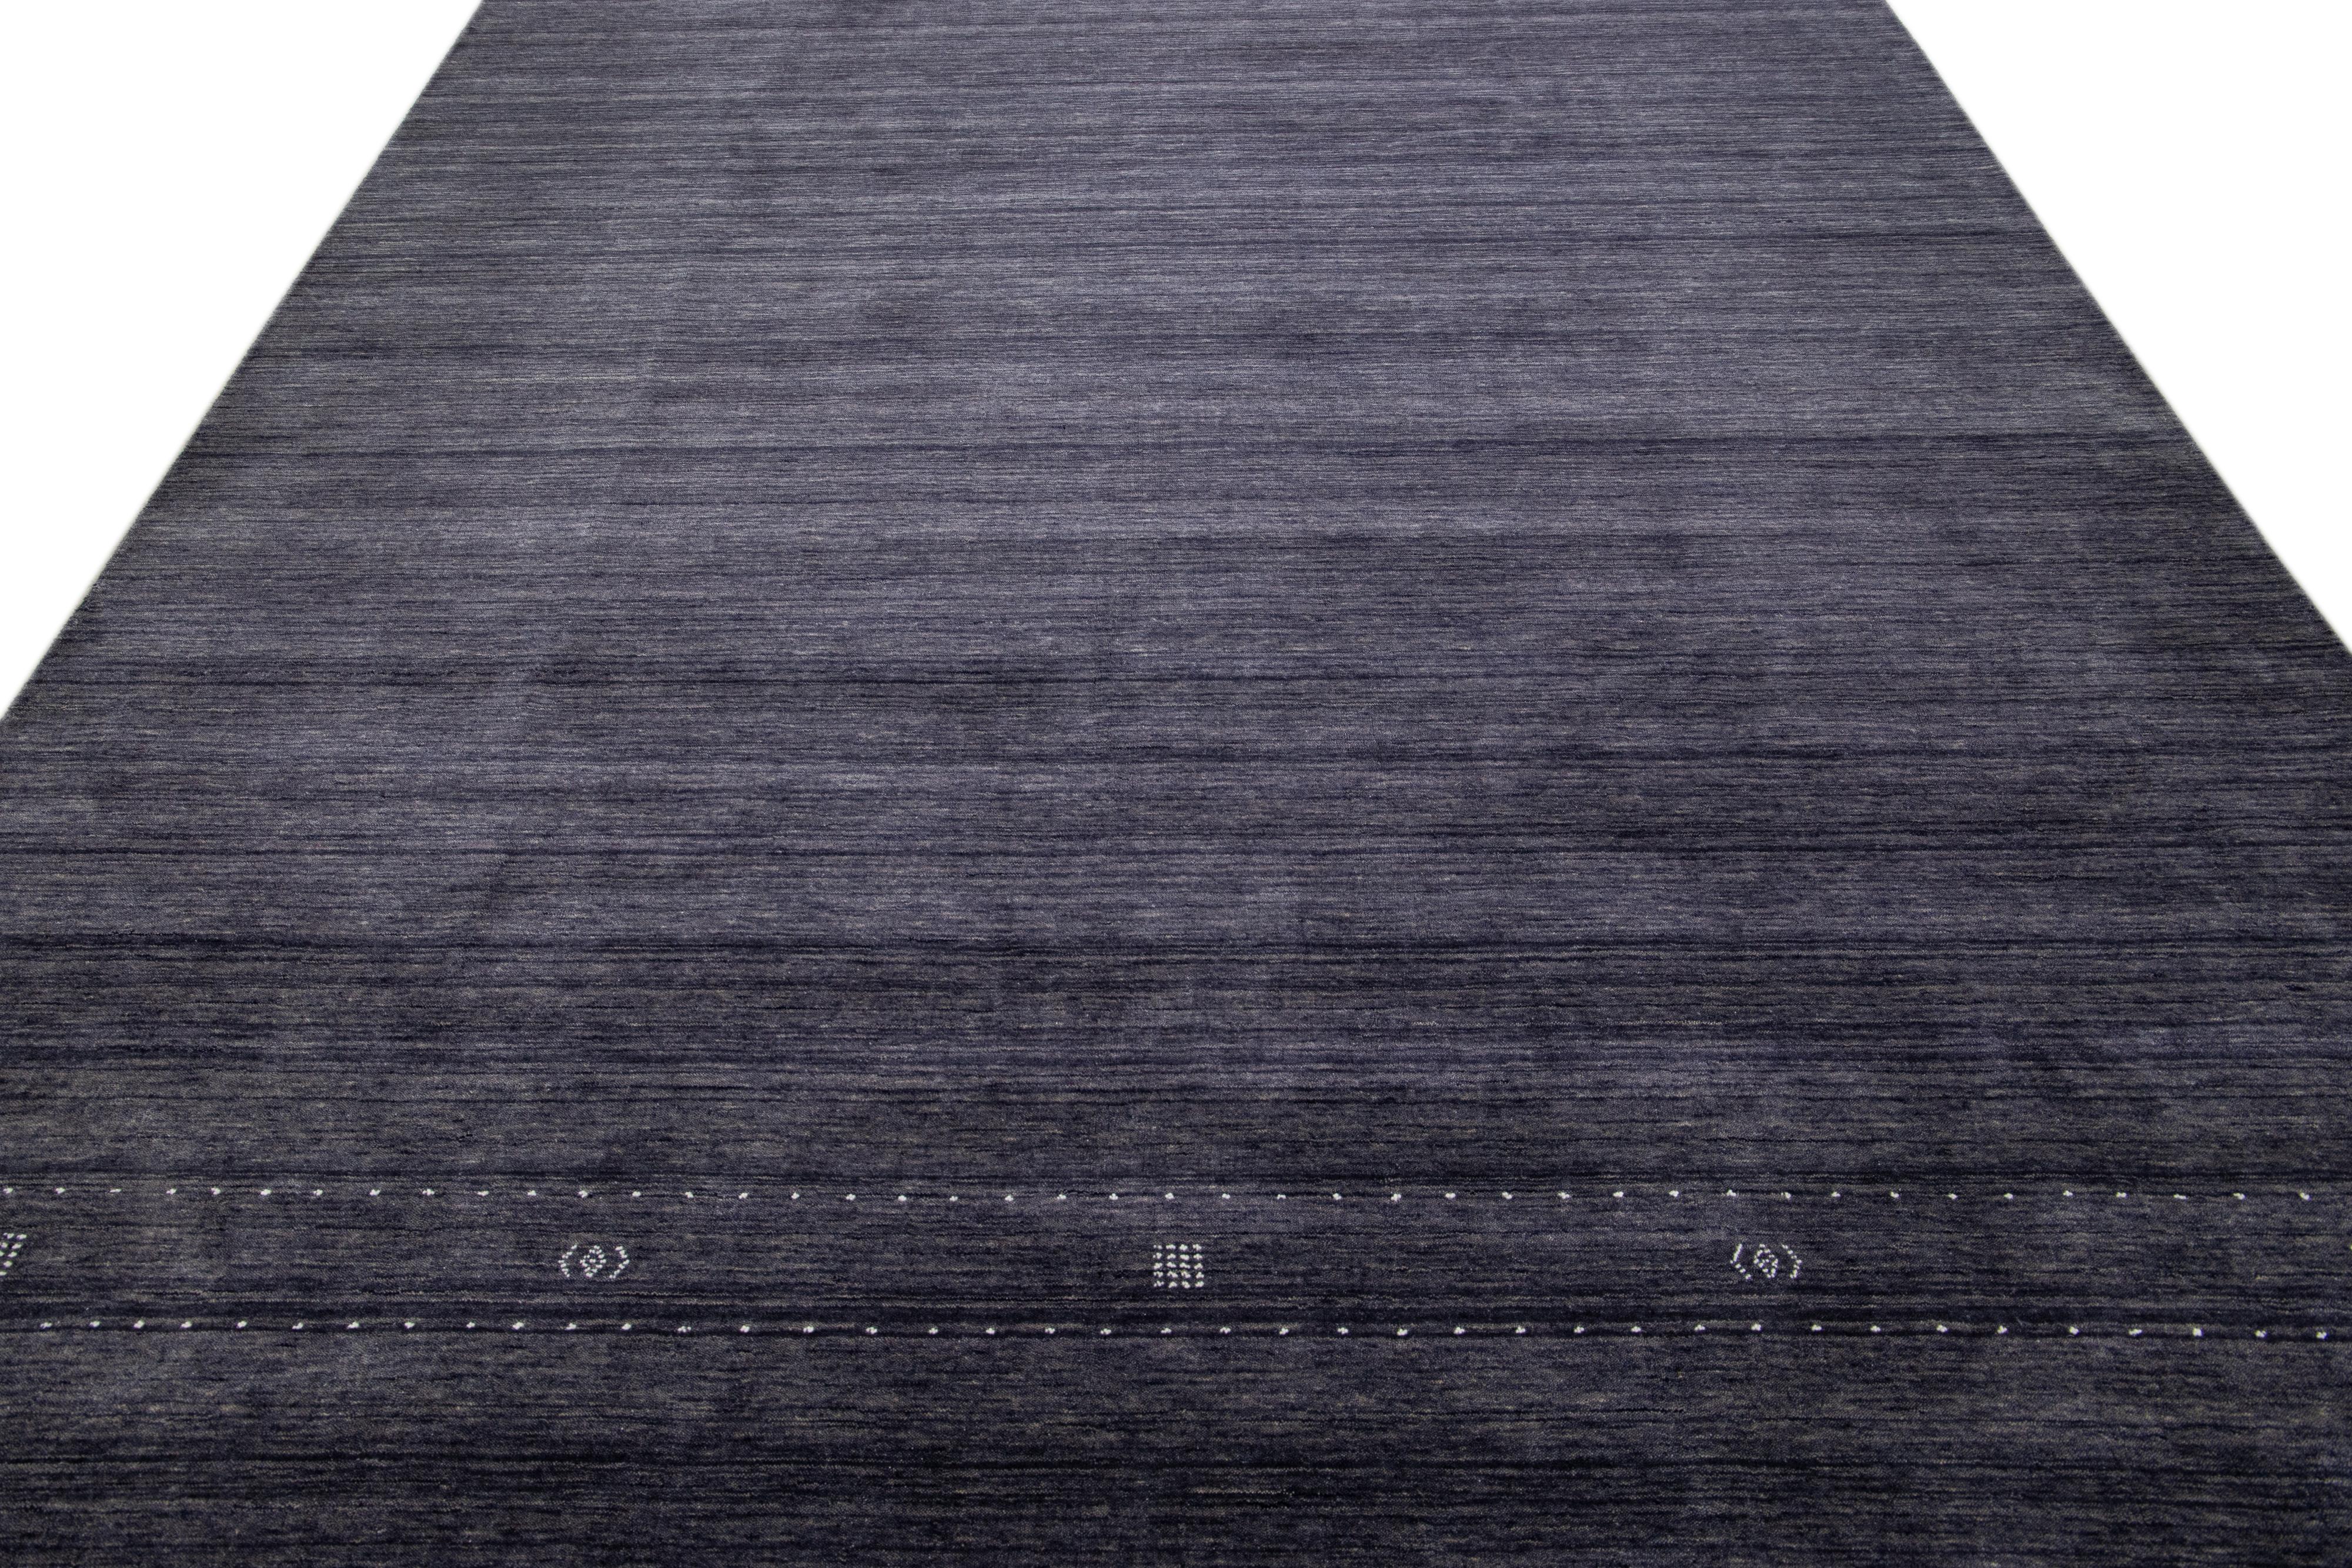 Minimalist Modern Gabbeh Style Hand-Loom Charcoal Wool Rug with Minimal Design  For Sale